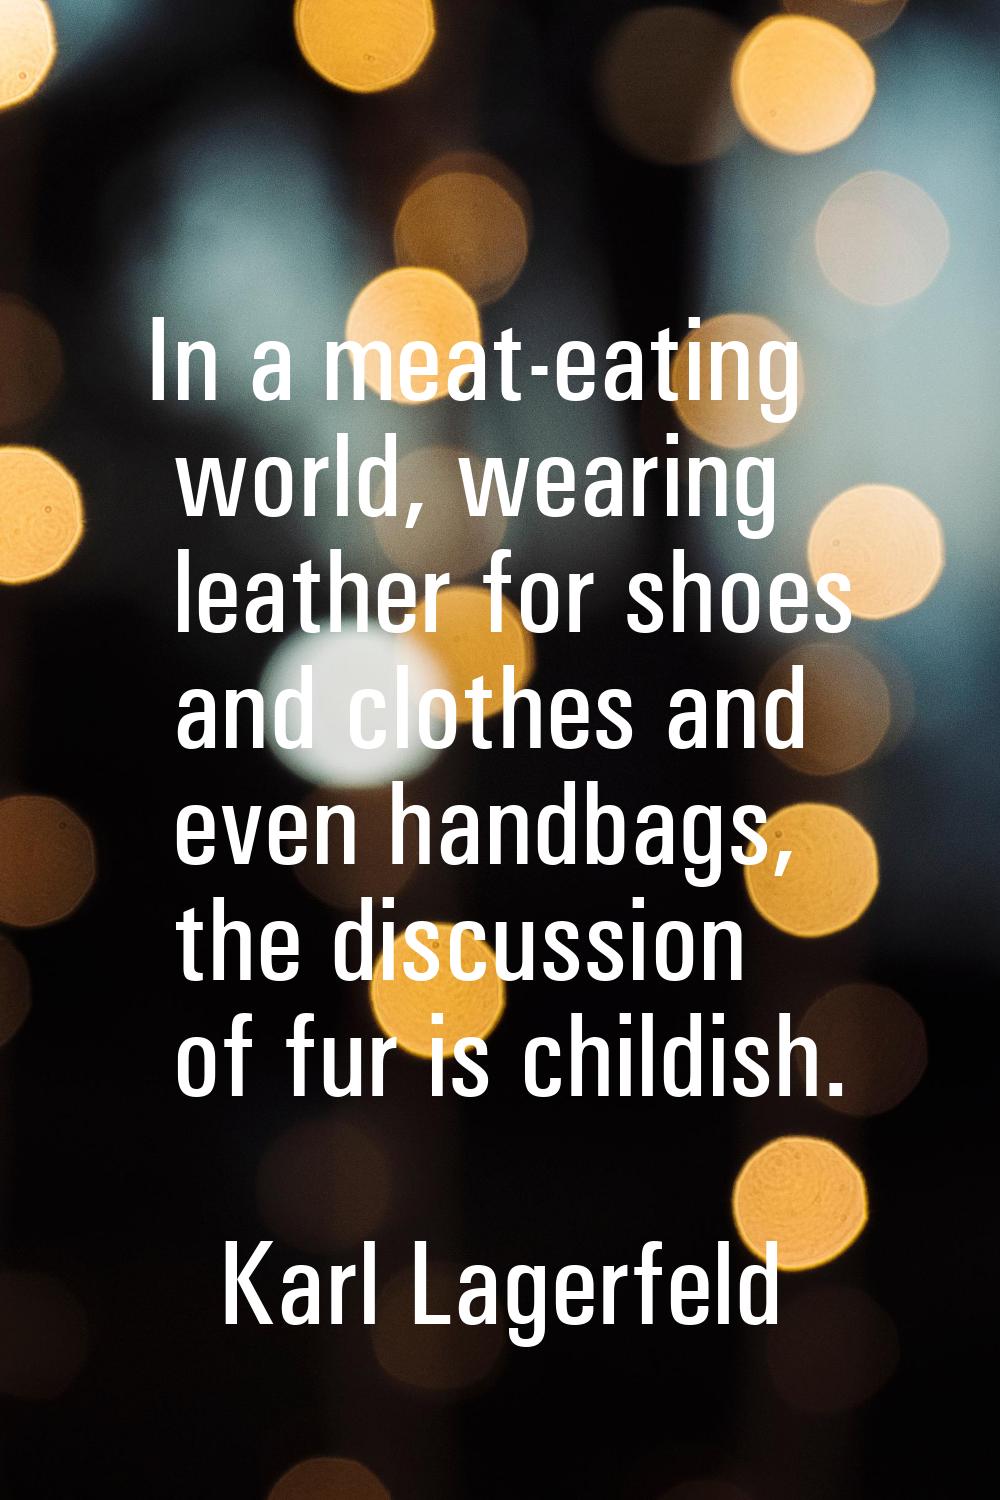 In a meat-eating world, wearing leather for shoes and clothes and even handbags, the discussion of 